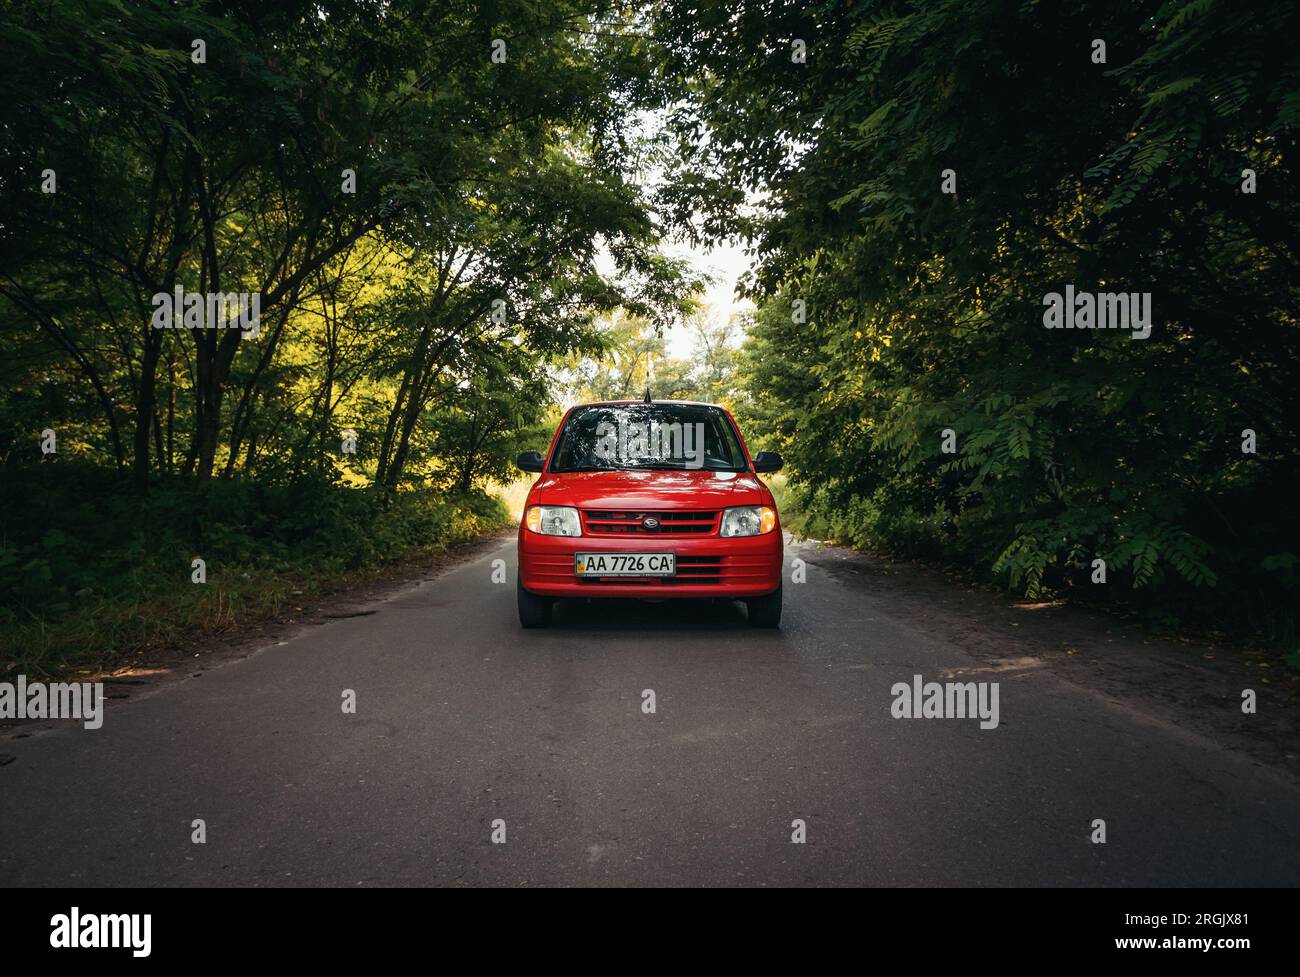 kei car Daihatsu Mira L700 on a road in deciduous forest. Frontal view of small red car driving through the woods. Stock Photo